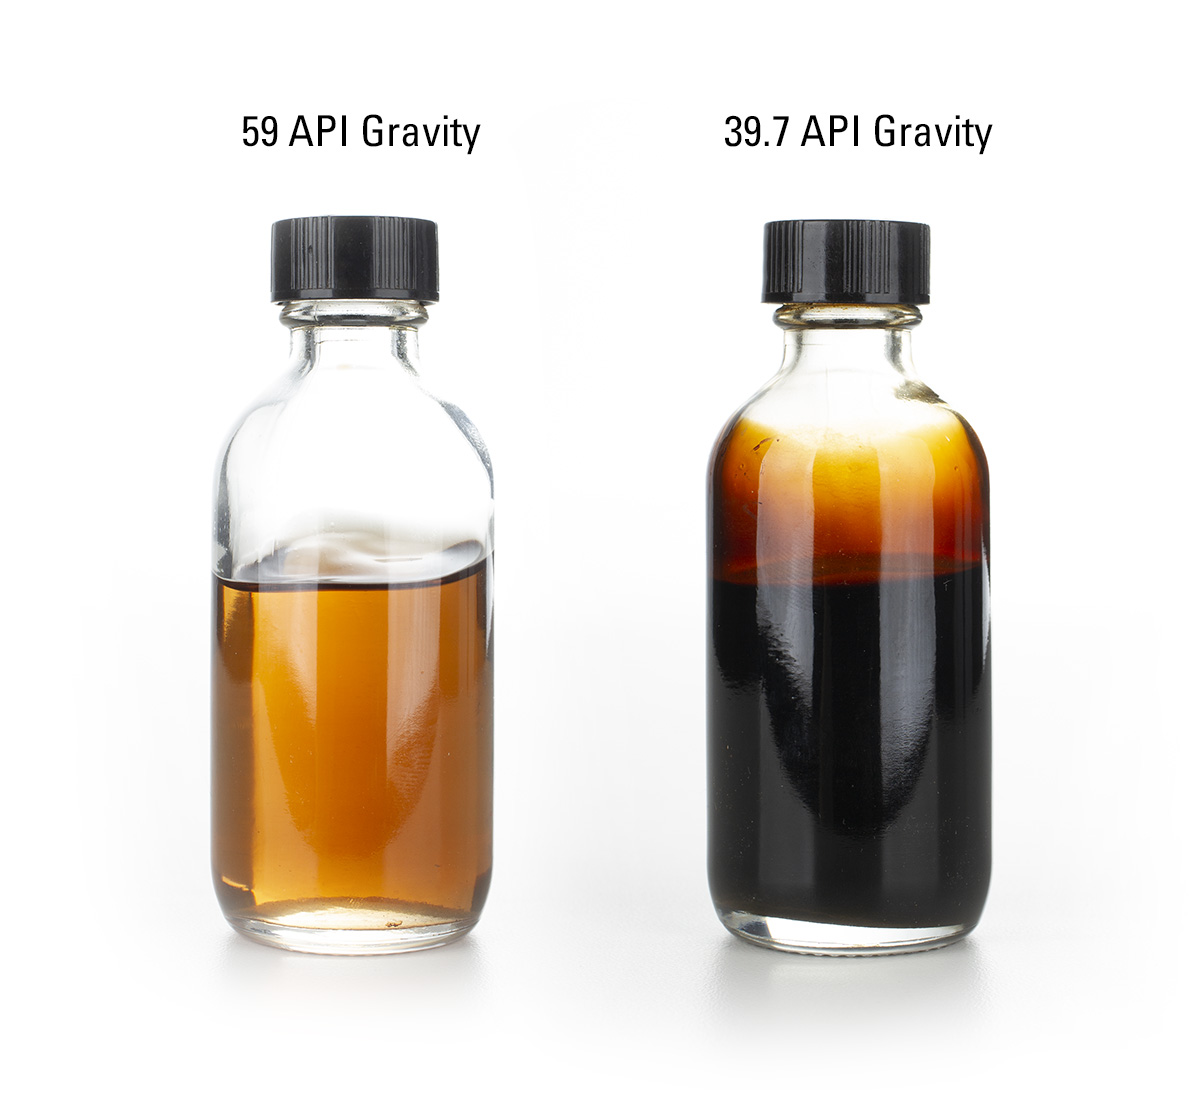 Lower and Higher API Gravity Crude Oil Samples